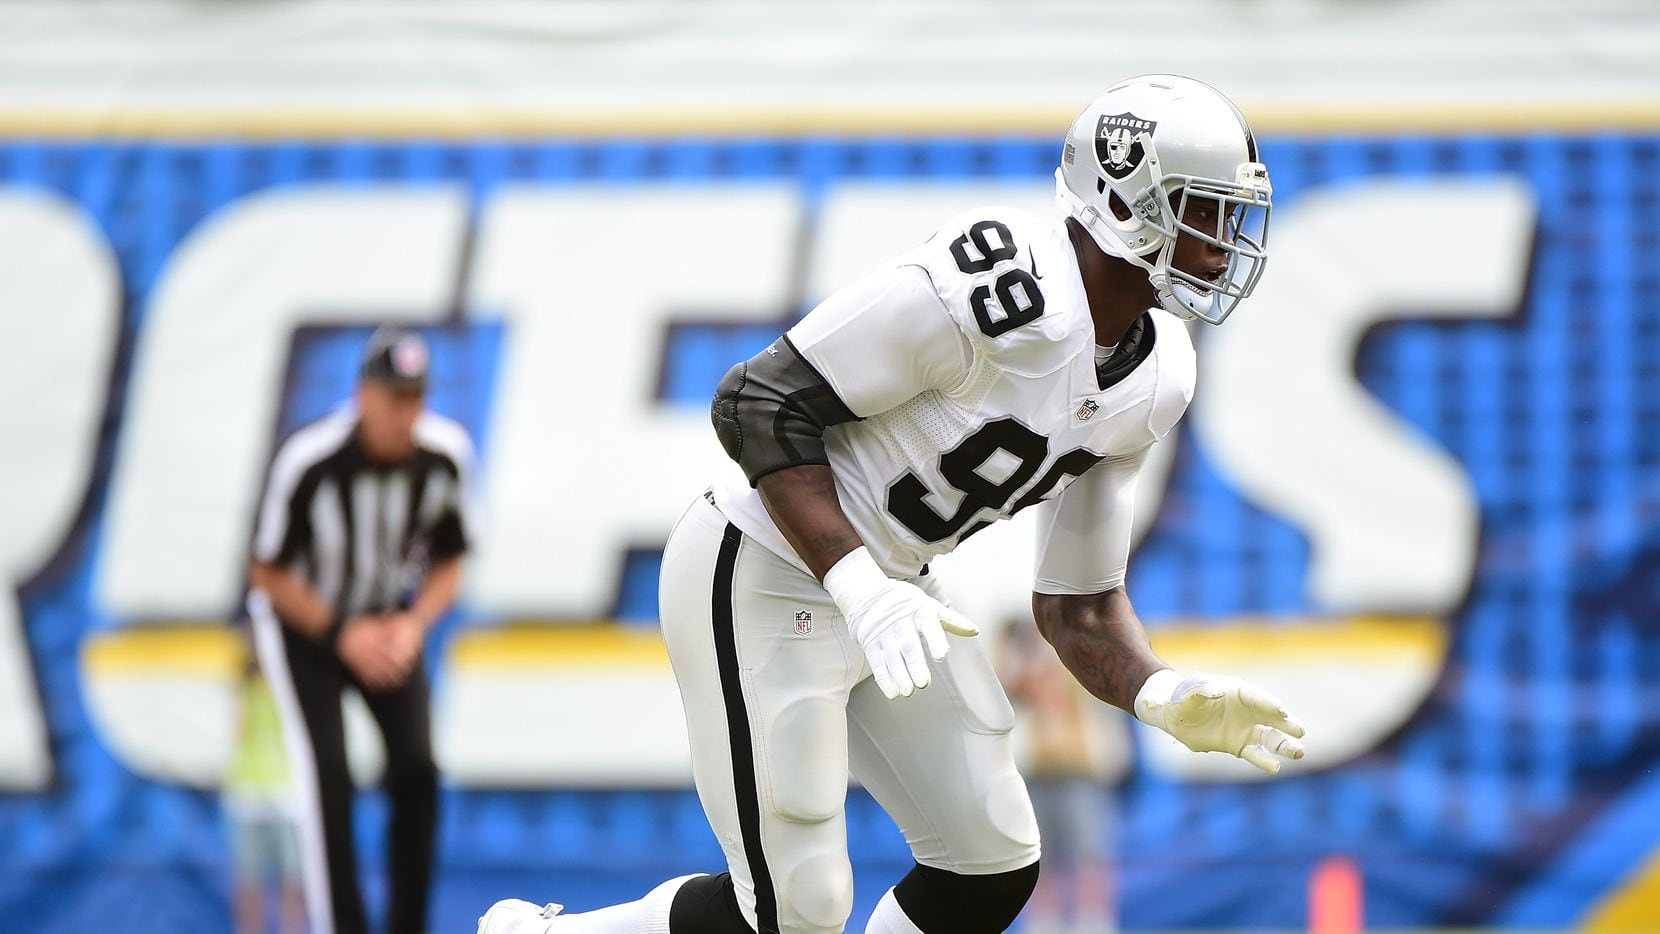 SAN DIEGO, CA - OCTOBER 25:  Aldon Smith #99 of the Oakland Raiders comes off the line during the game against the San Diego Chargers at Qualcomm Stadium on October 25, 2015 in San Diego, California.  (Photo by Harry How/Getty Images)